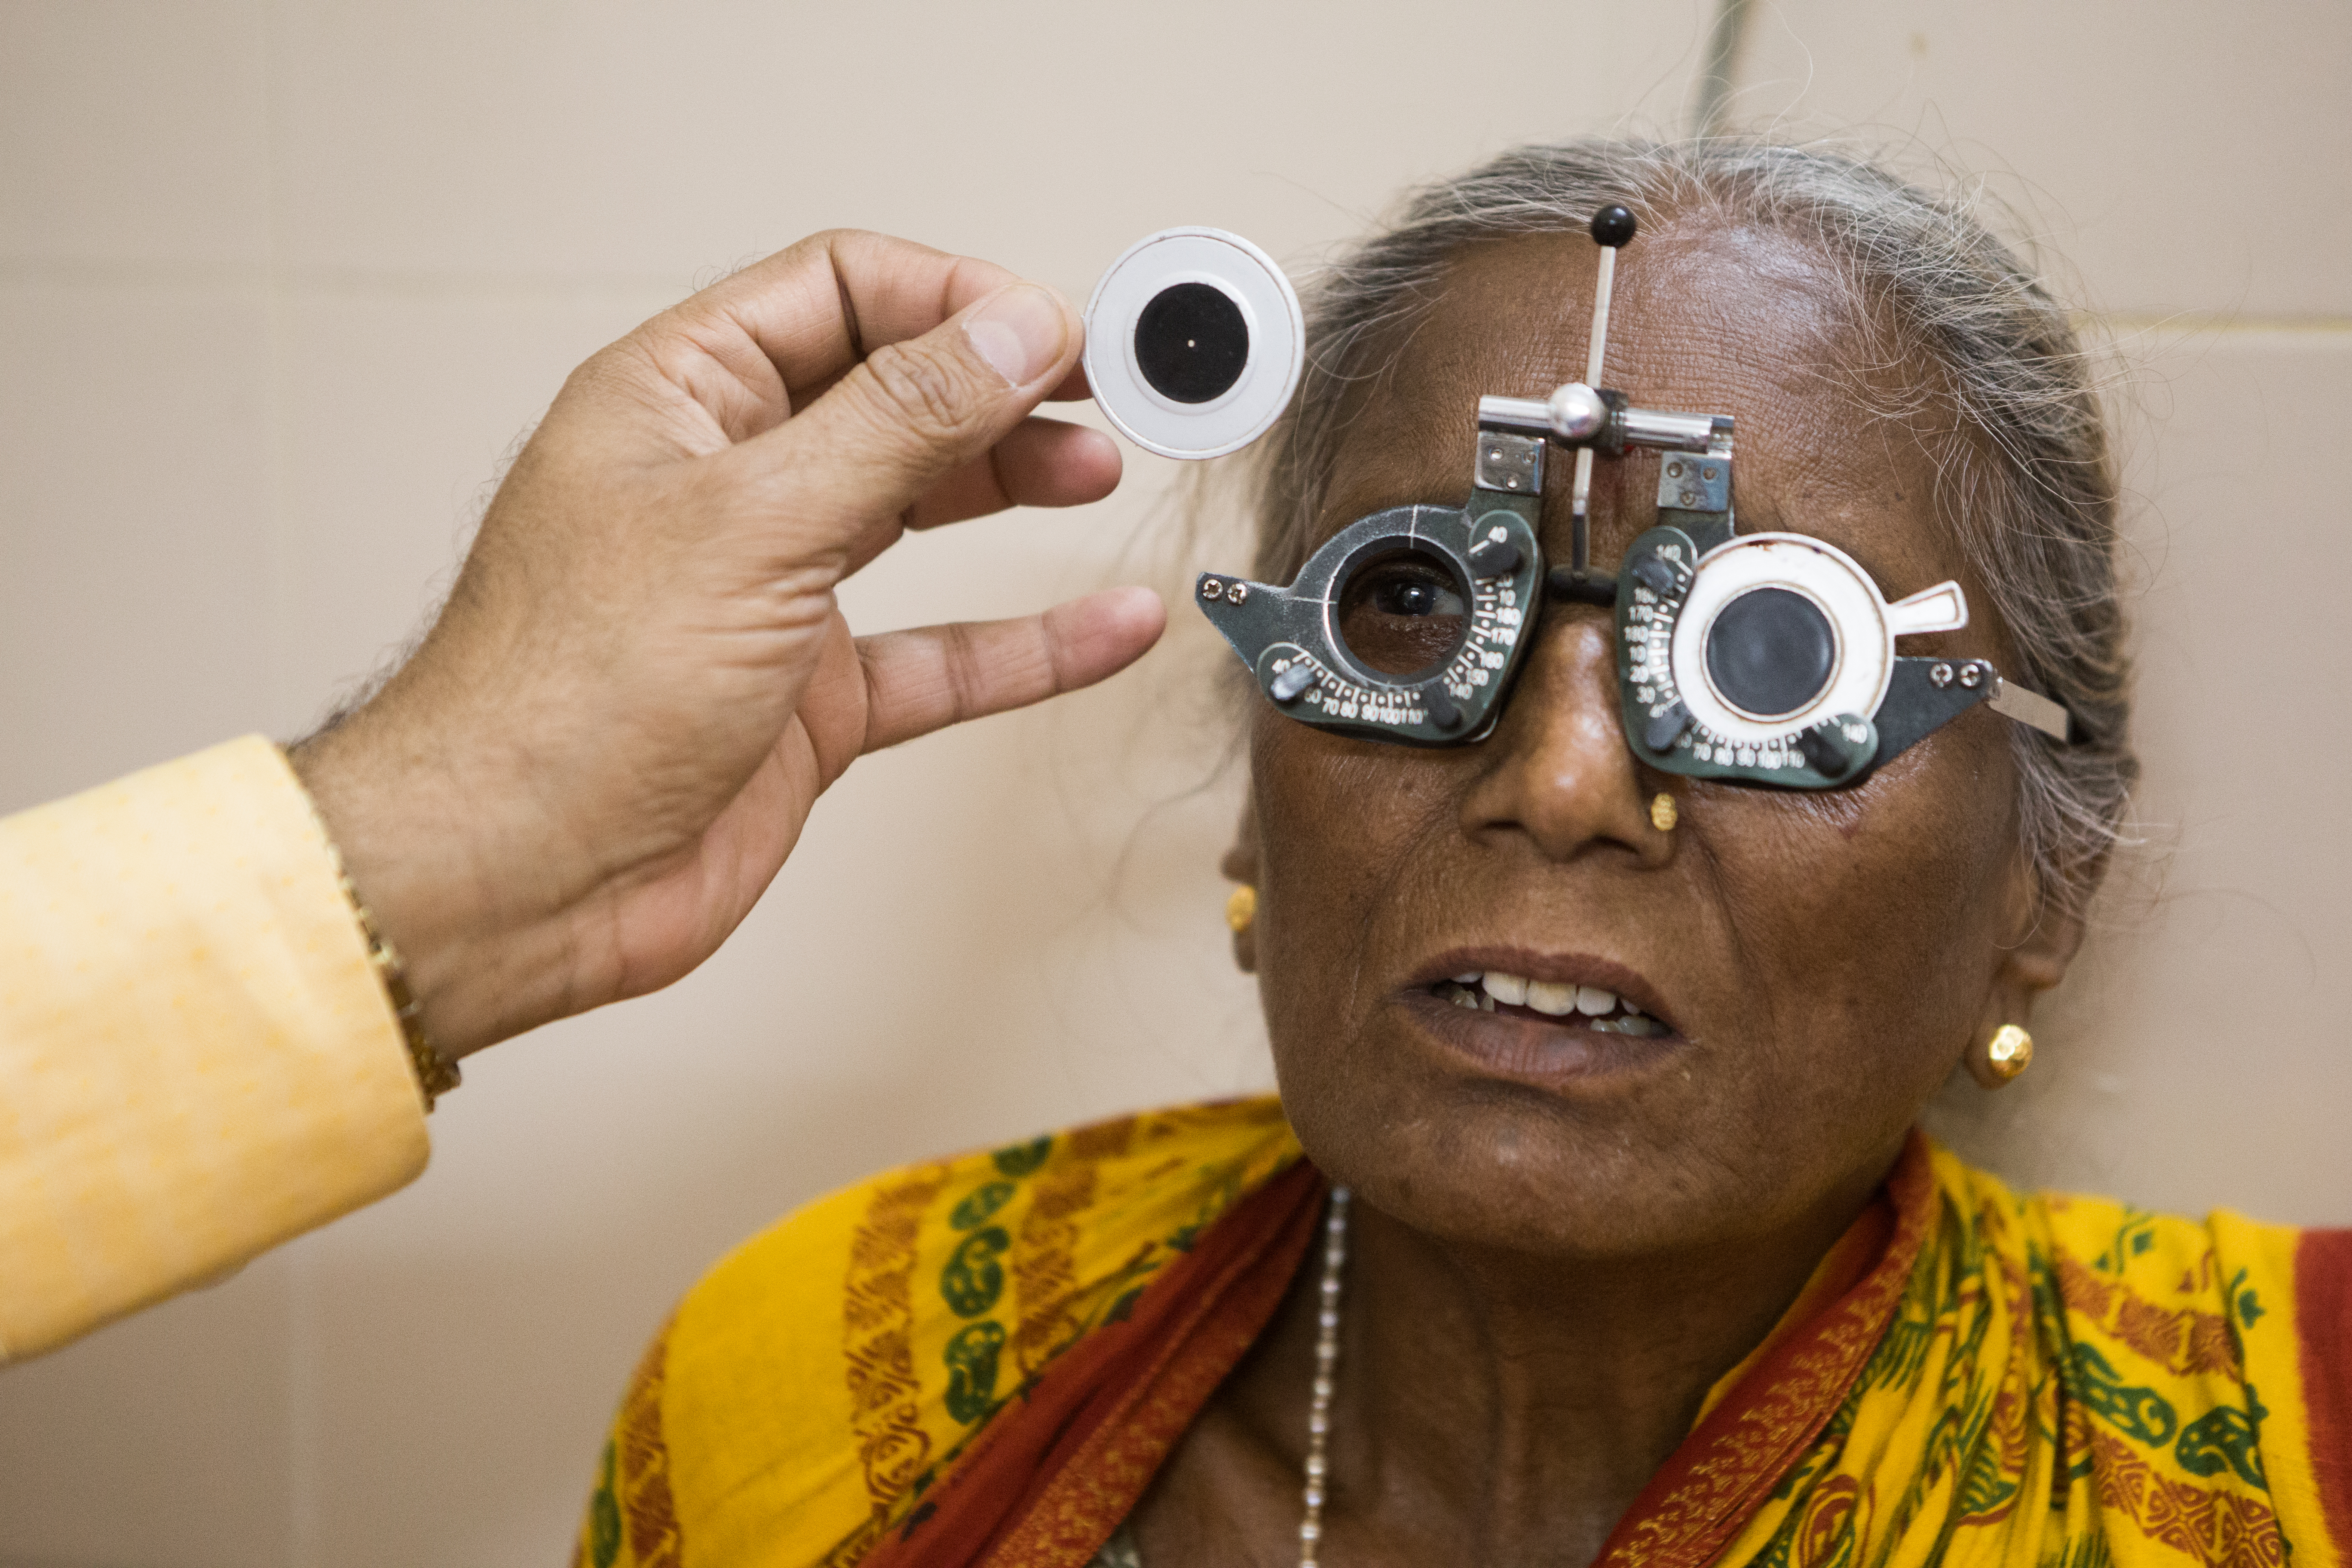 A patient getting checked for refraction. INDIA ©RAJESH PANDEY, DRROP INDIA INITIATIVES